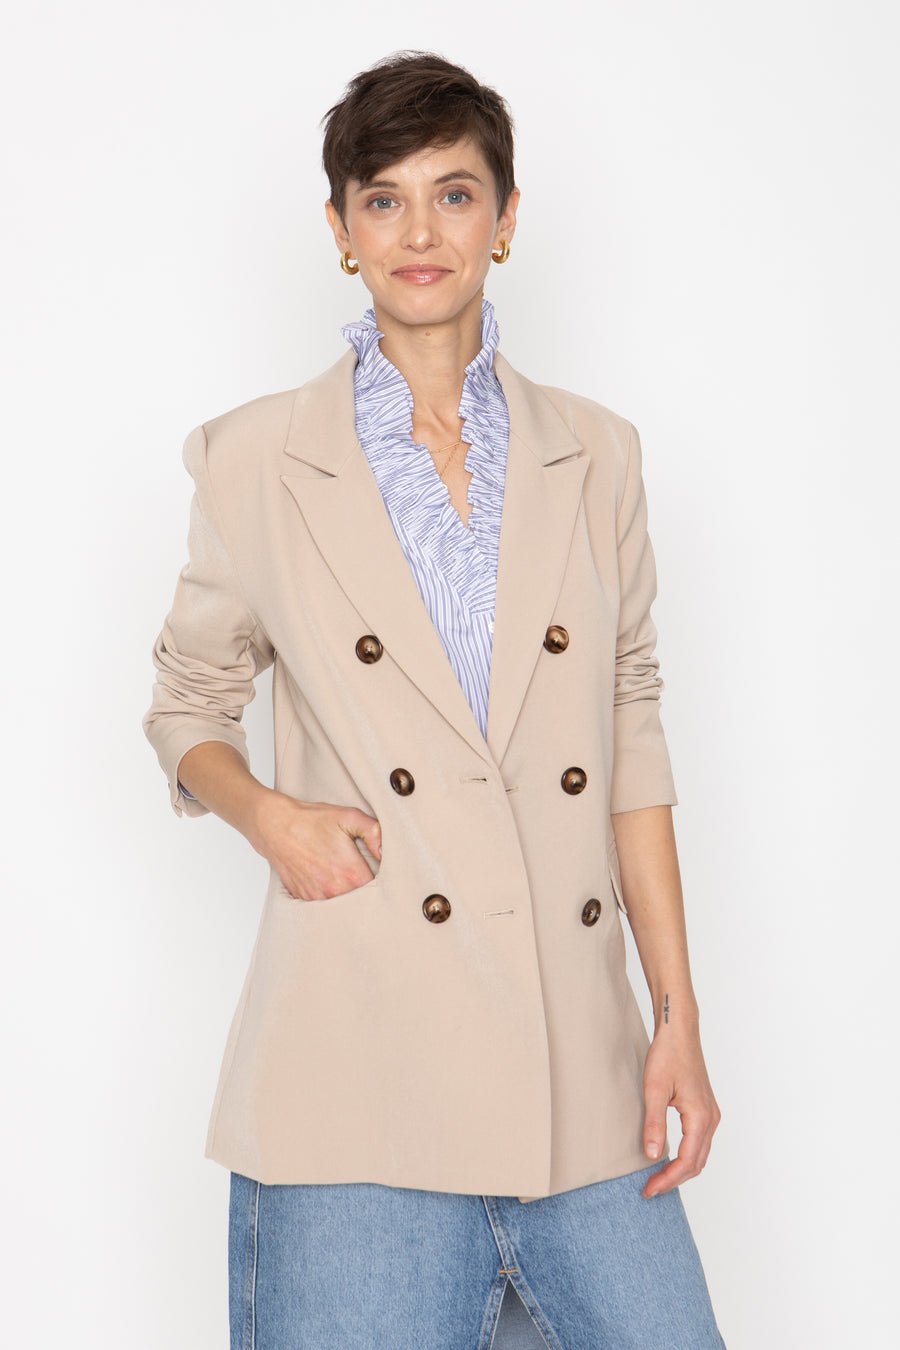 No Srcipt image - Images of 1 of 6 EMORY BLAZER OVERSIZED JACKET DOUBLE BREASTED BEIGE COLOR FLAP POCKETS